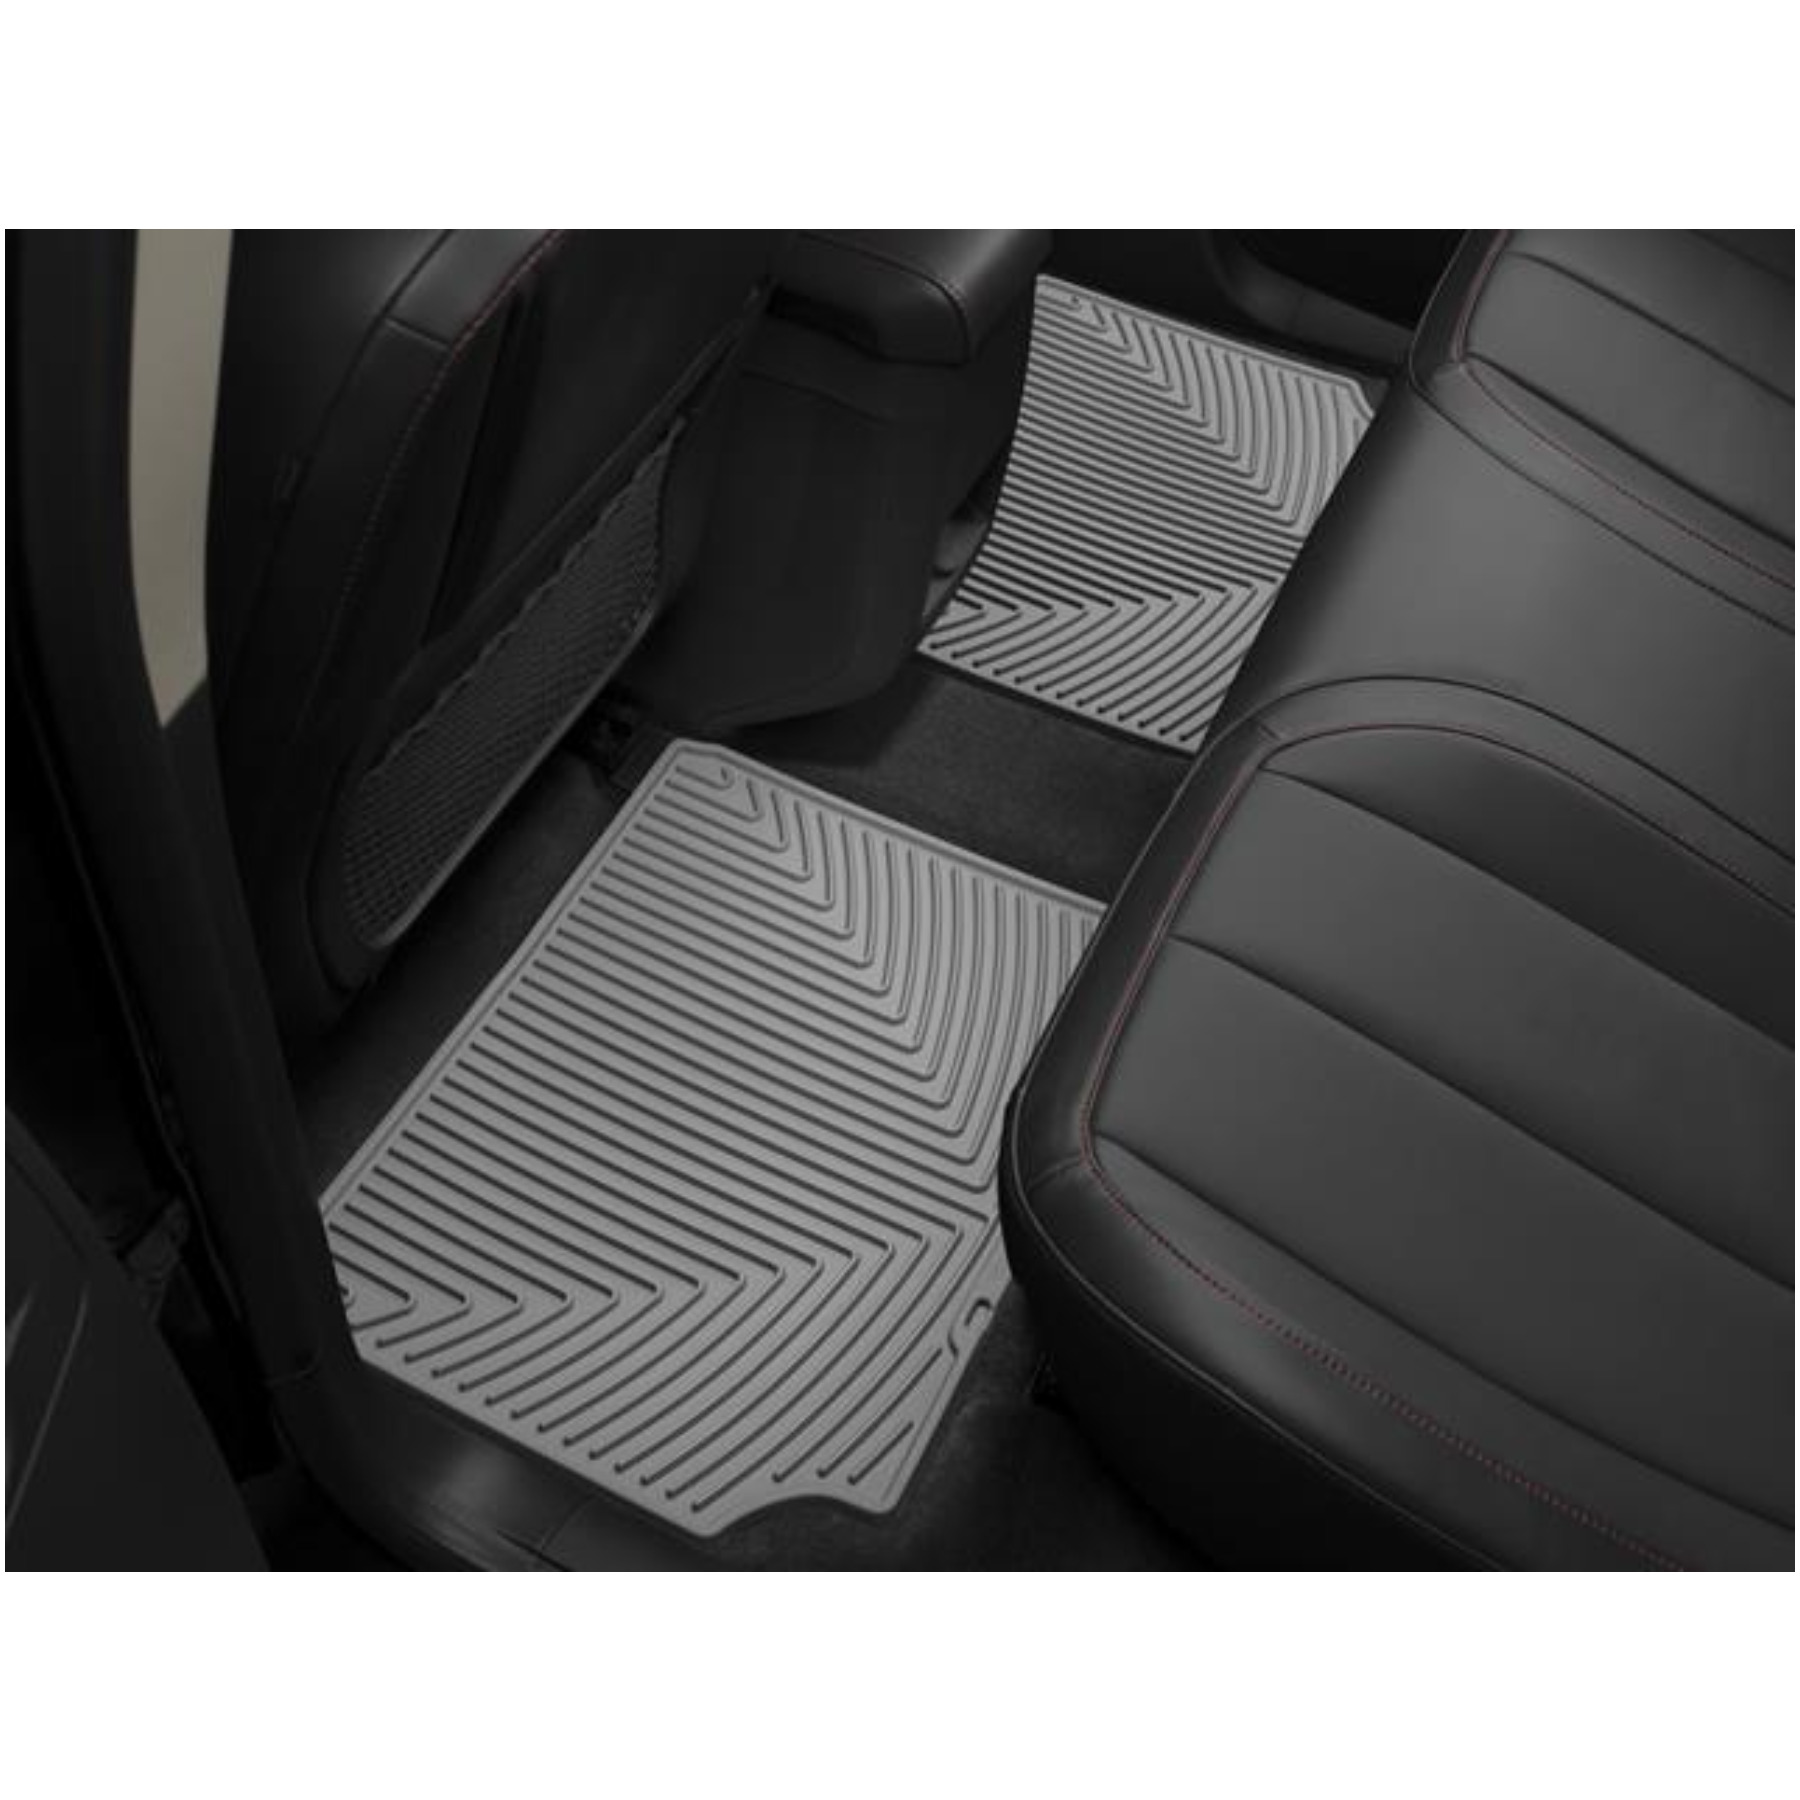 All weather floor mats for 2013 ford explorer #10